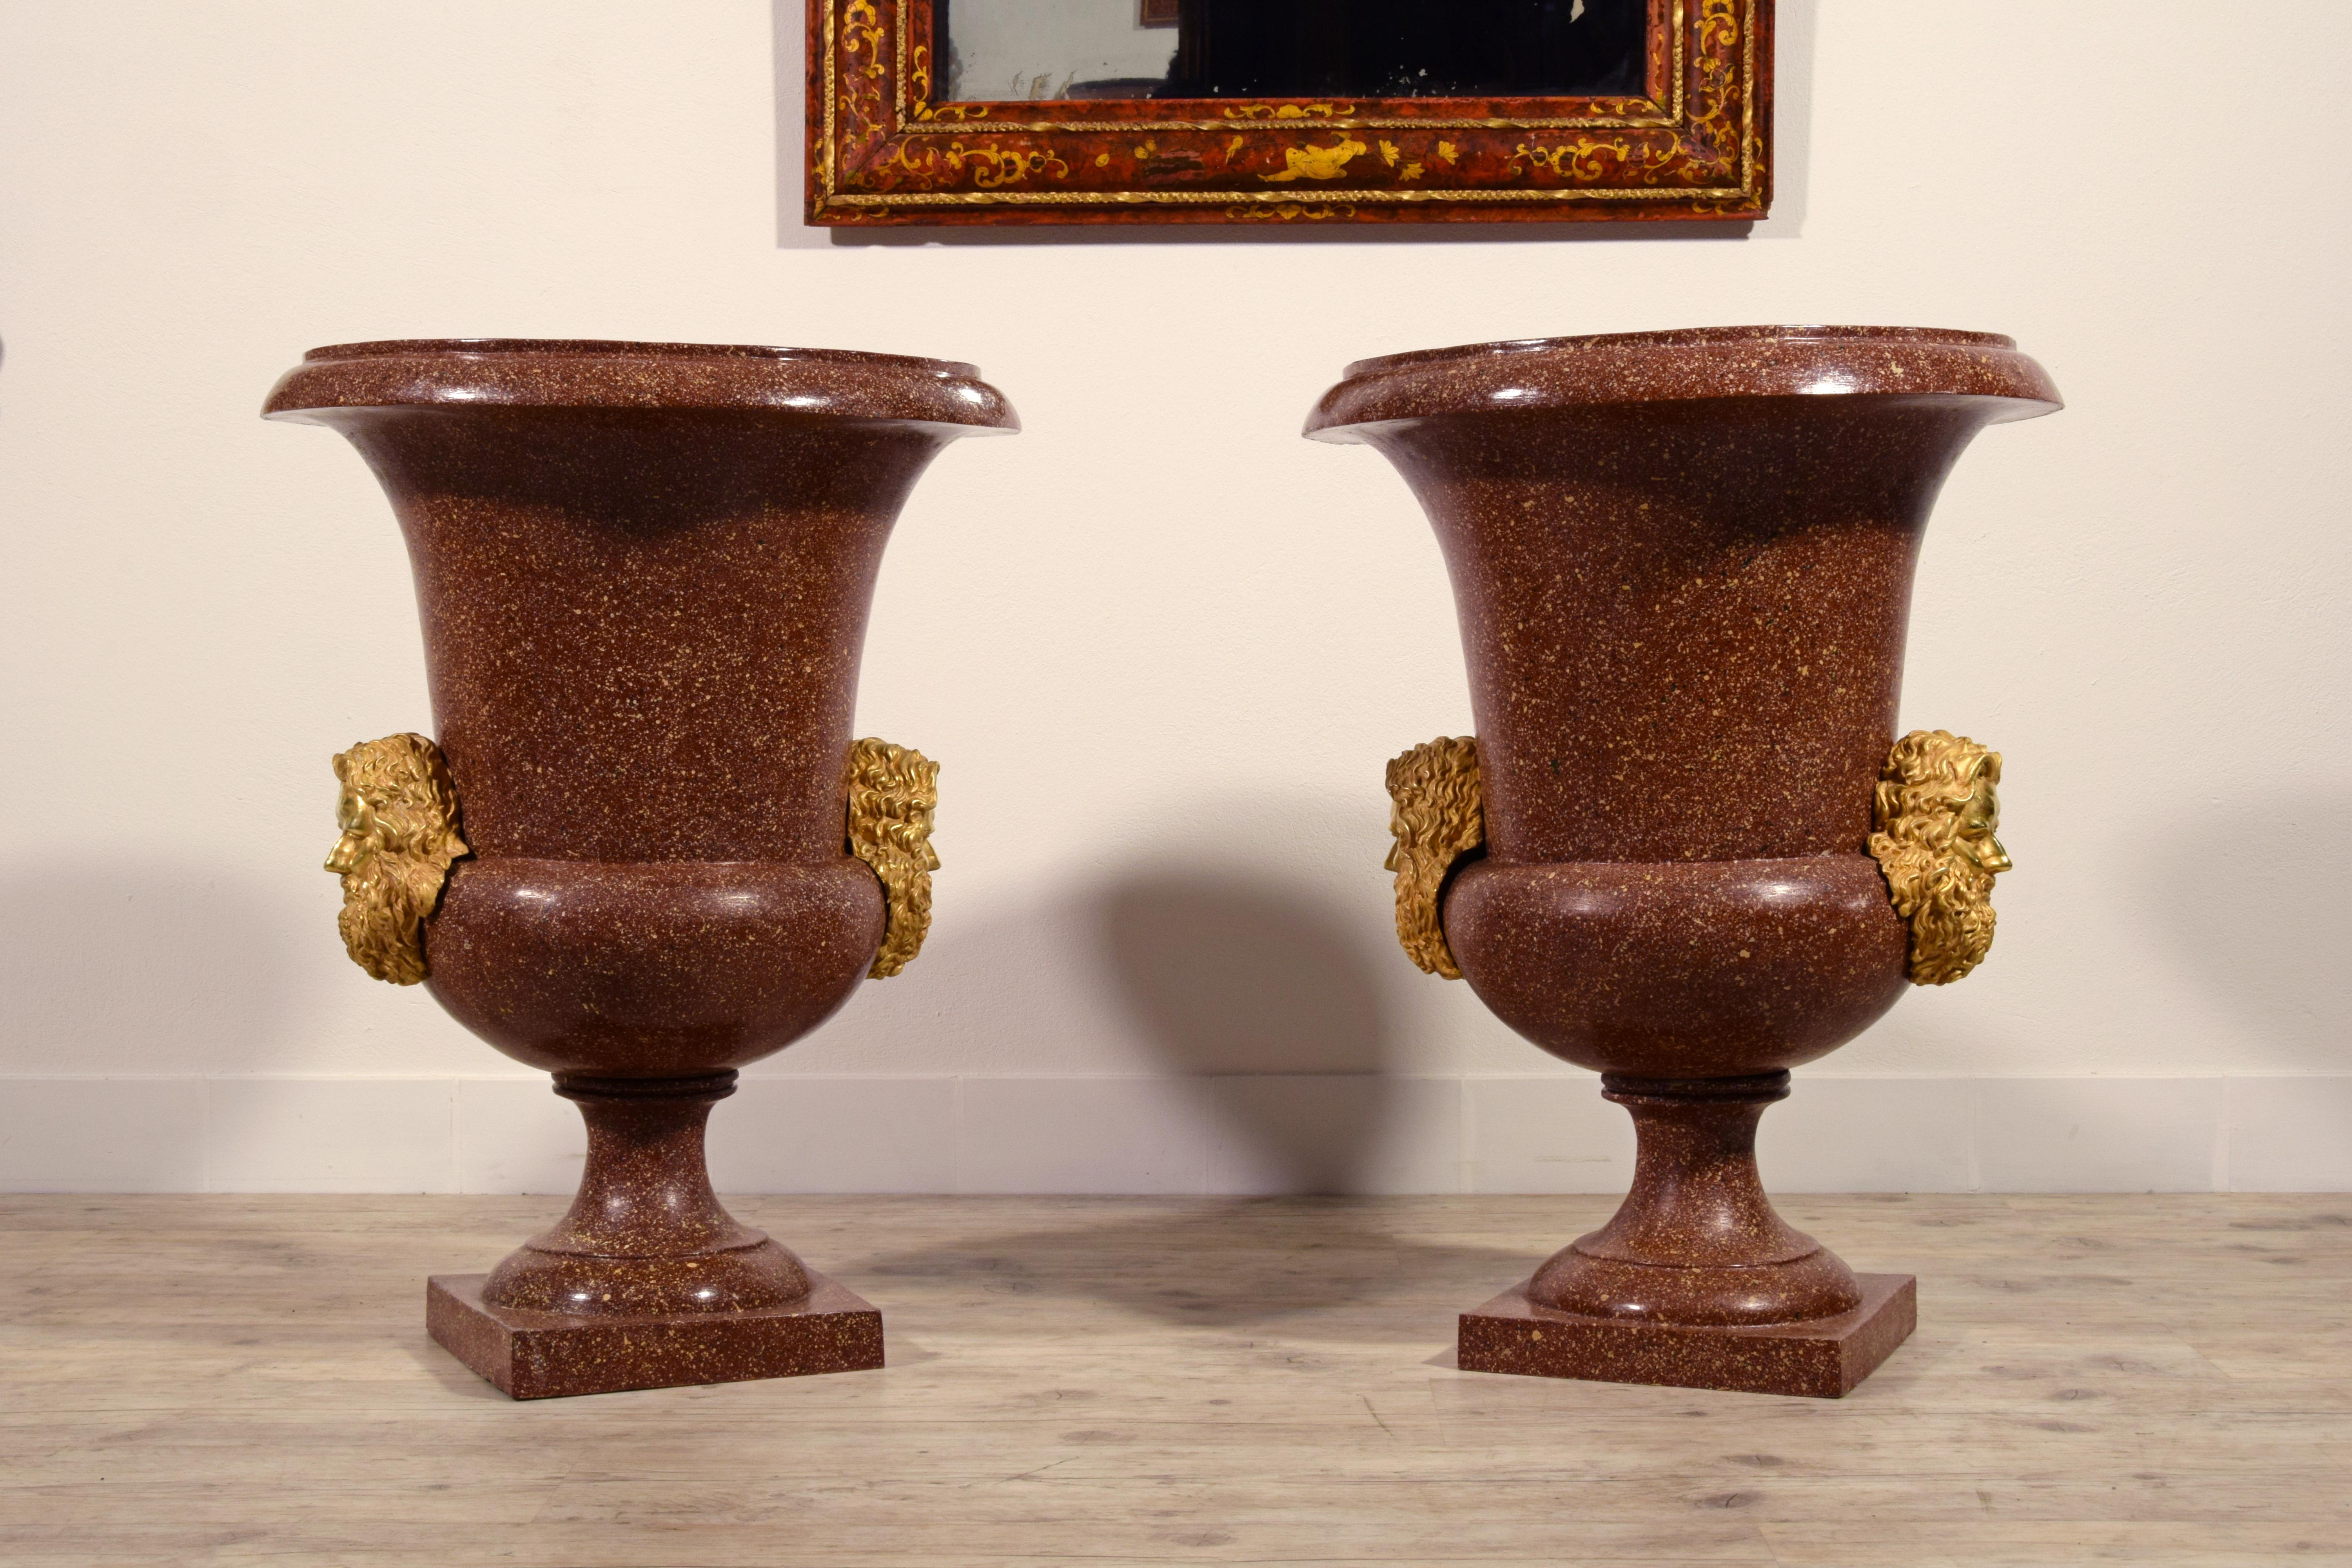 19th Century, Pair of Italian Lacquered Bronze Vases

Pair of vases in bronze lacquered with fake porphyry with applications in chiseled and gilded bronze, Rome, late nineteenth century - early twentieth century, Neoclassical style
Measurements: H